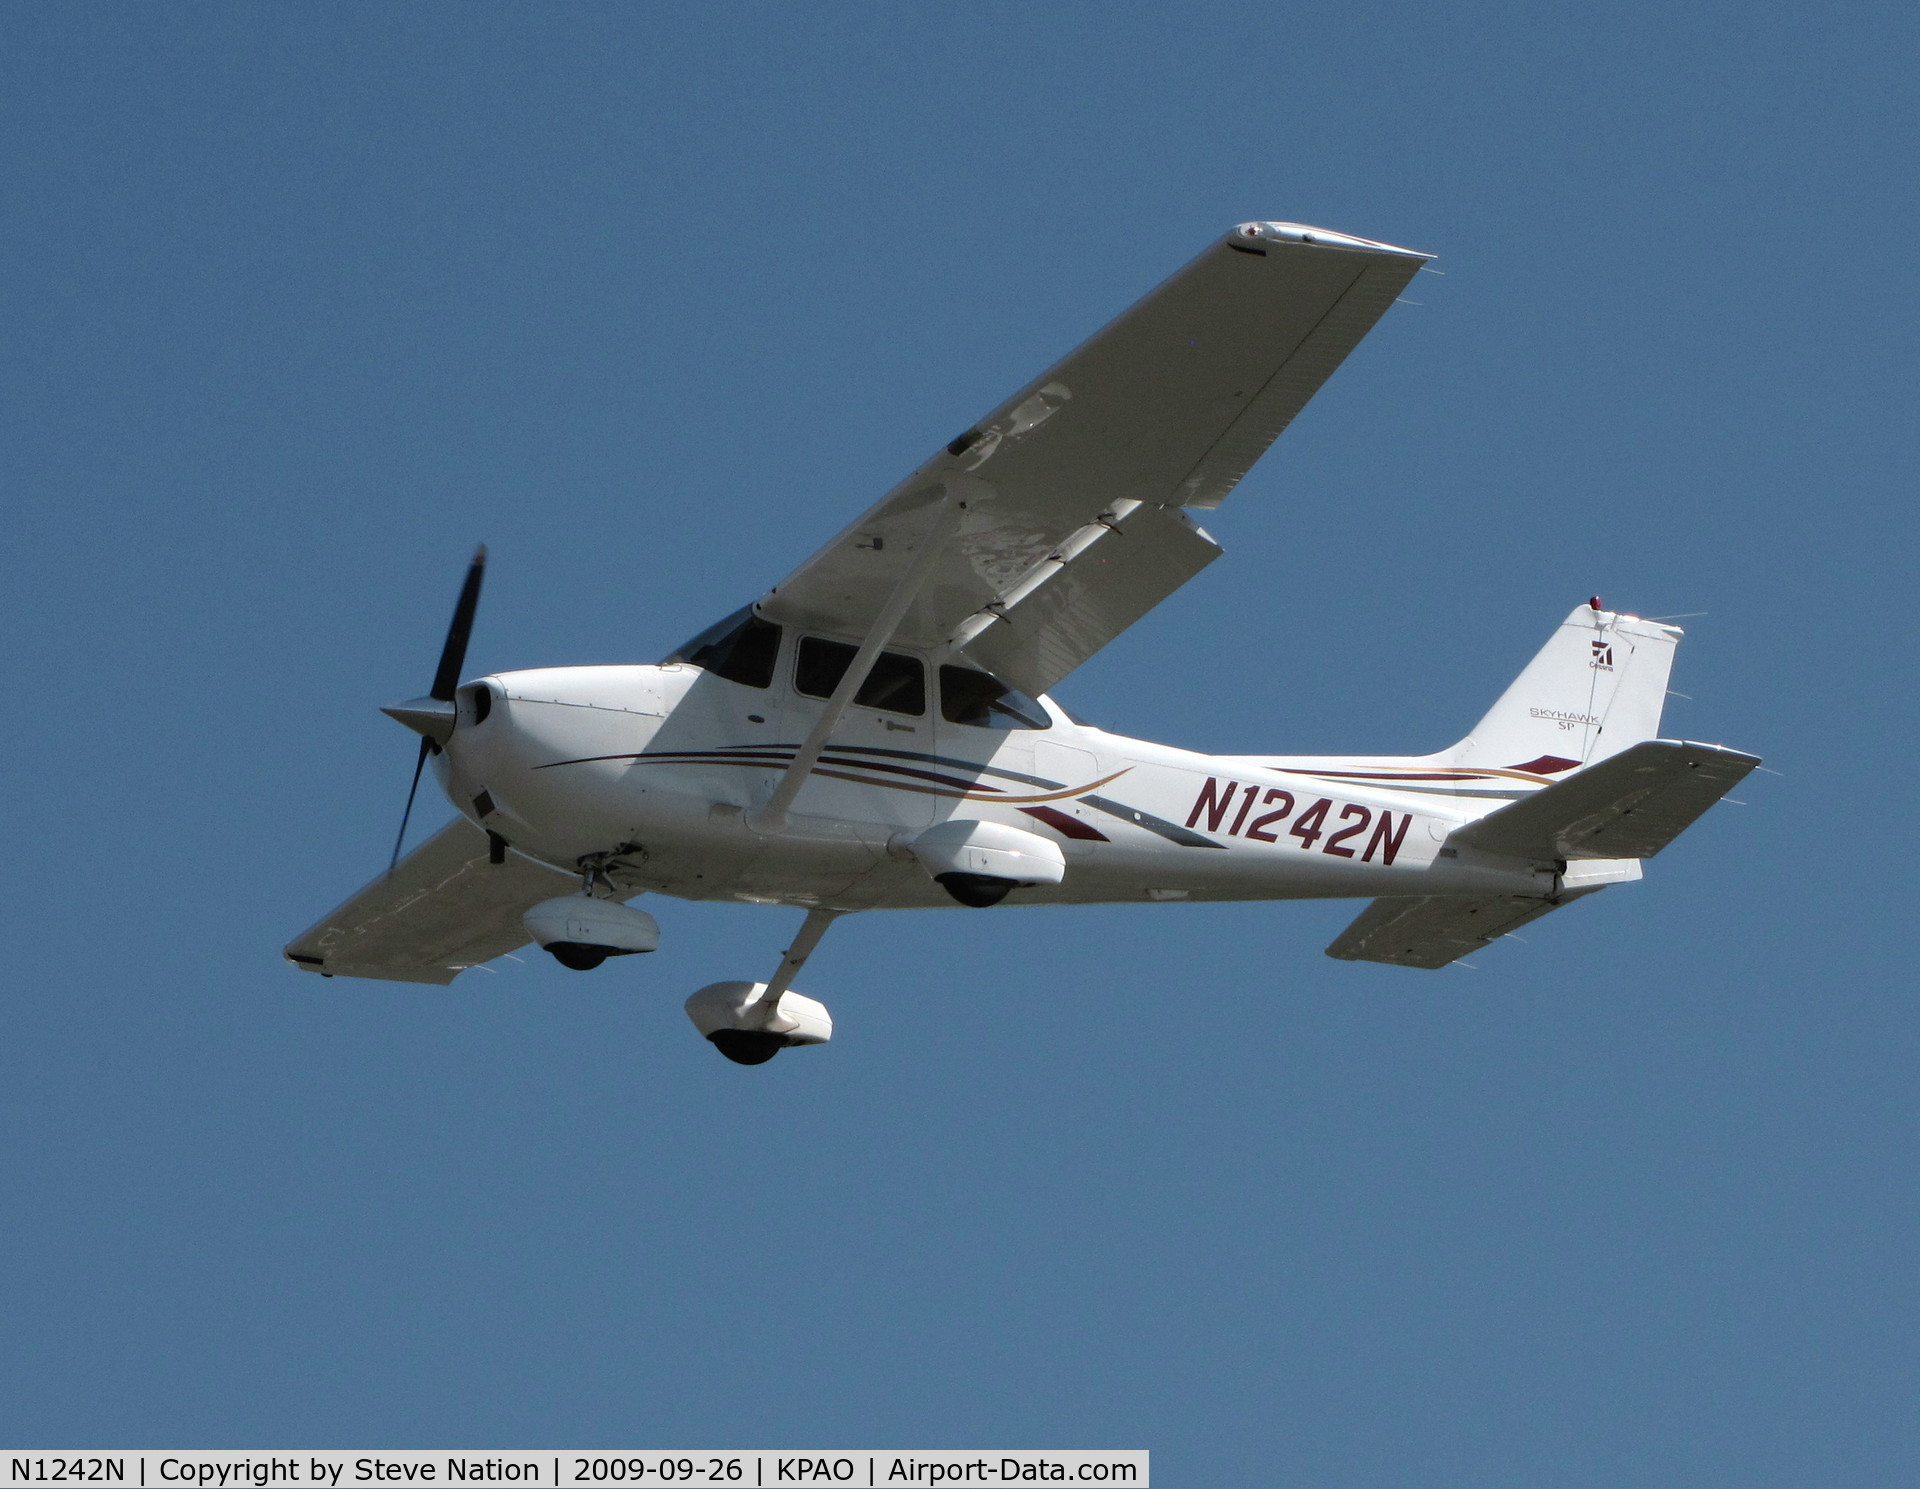 N1242N, 2006 Cessna 172S C/N 172S10309, Locally-based 2006 Cessna 172S on final